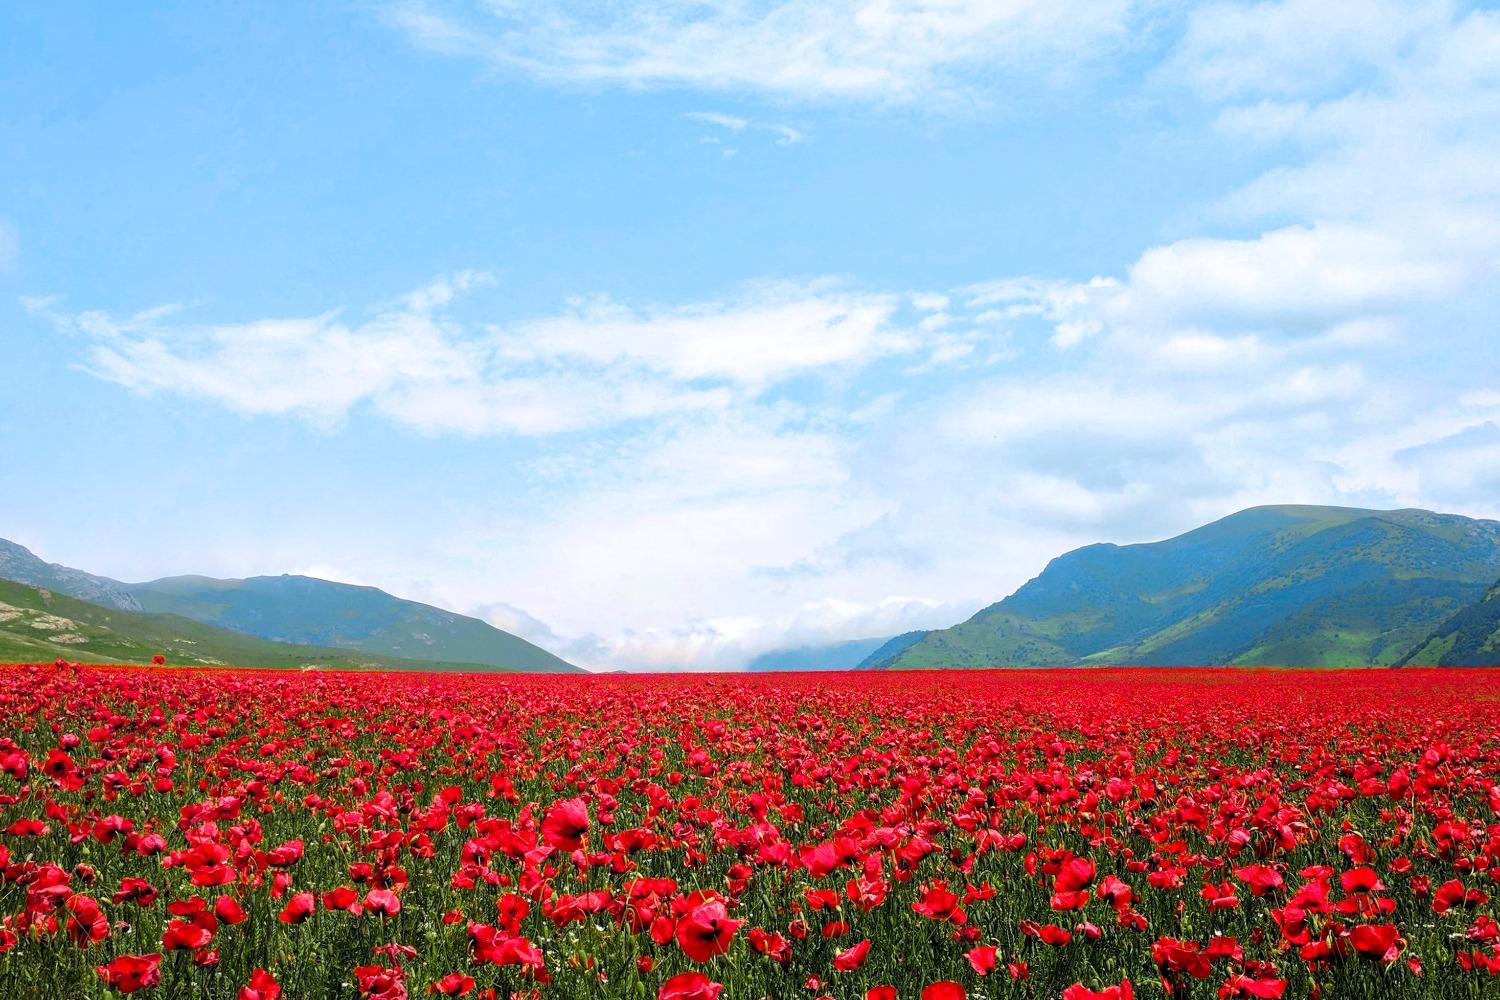 A valley of red flowers